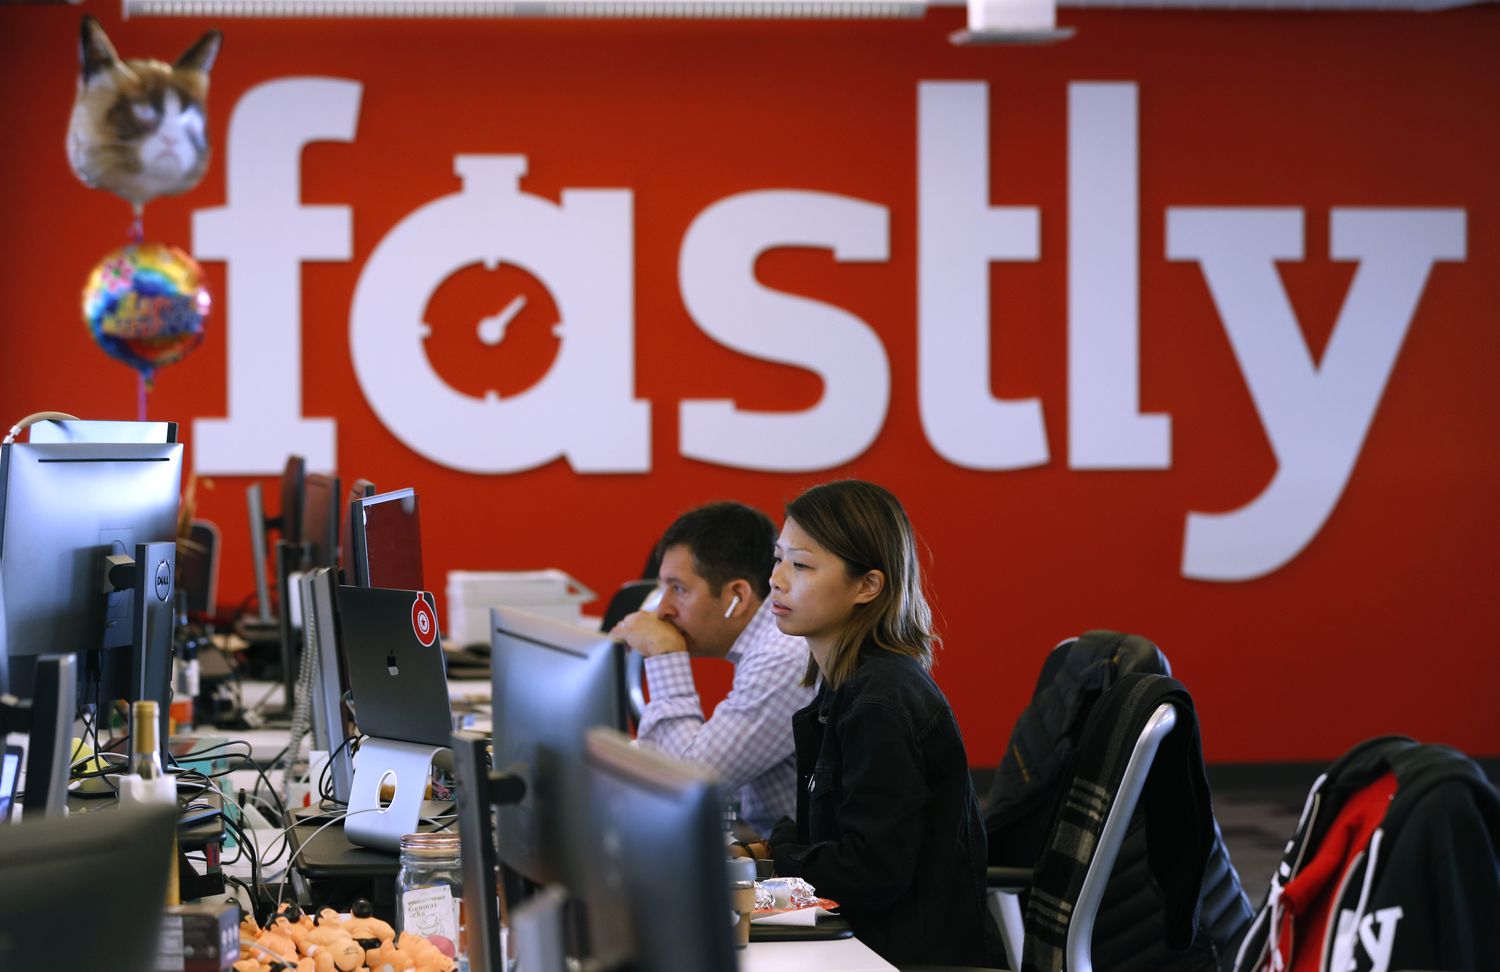 Fastly Stock Surges Following Piper Sandler Upgrade Amid ‘Favorable Competitive Landscape’ [Video]